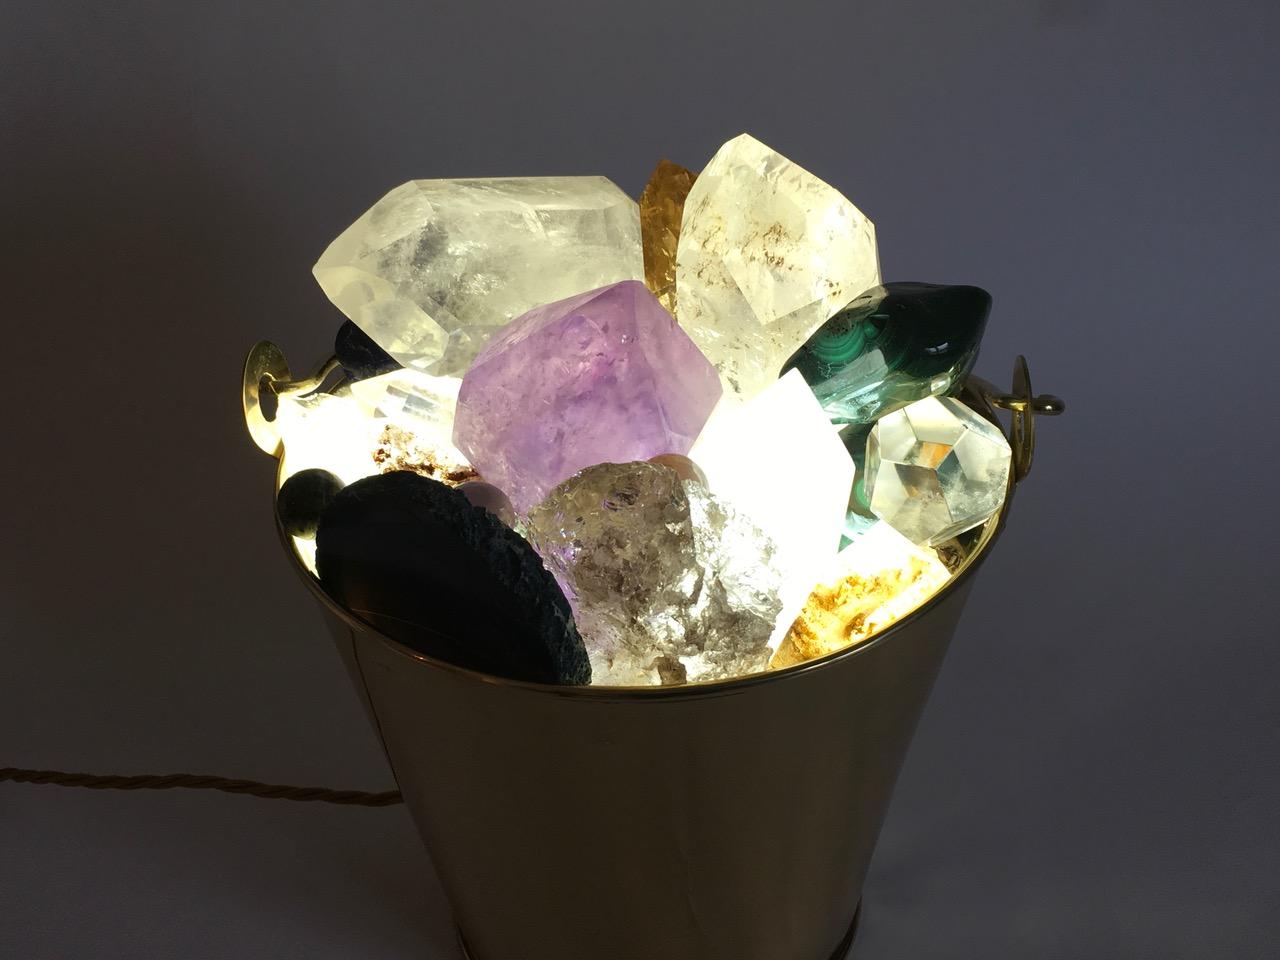 Beautiful table lamp Eldorado, brass bucket with quartz and malachite stones, lapis, agate, amethyst, pyrite etc. designed and produced by Studio Superego.

Biography
Superego editions was born in 2006, performing a constant activity of research in